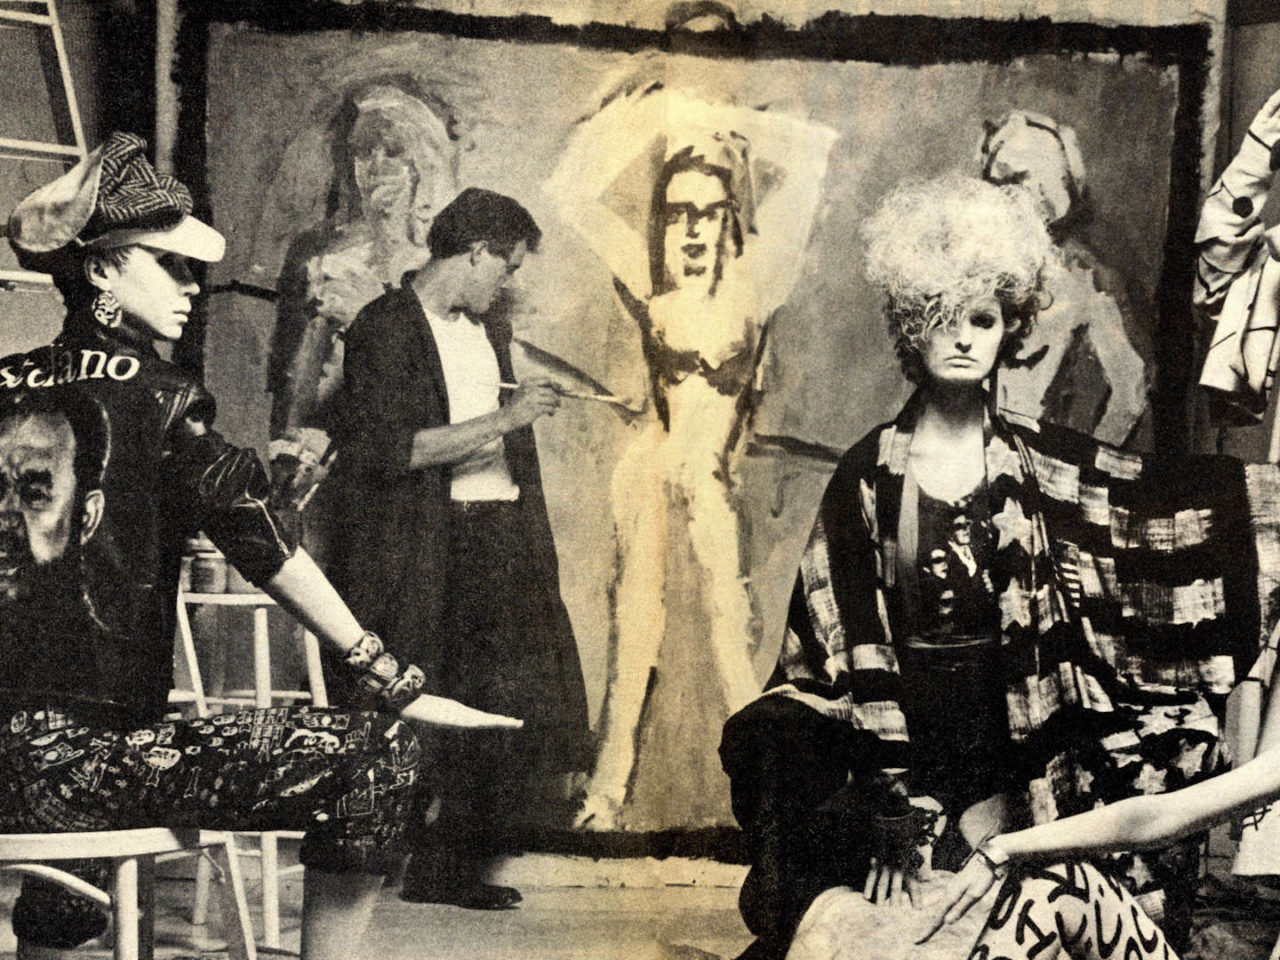 A still from the film Make Me Famous. A group of artists look at a painting.